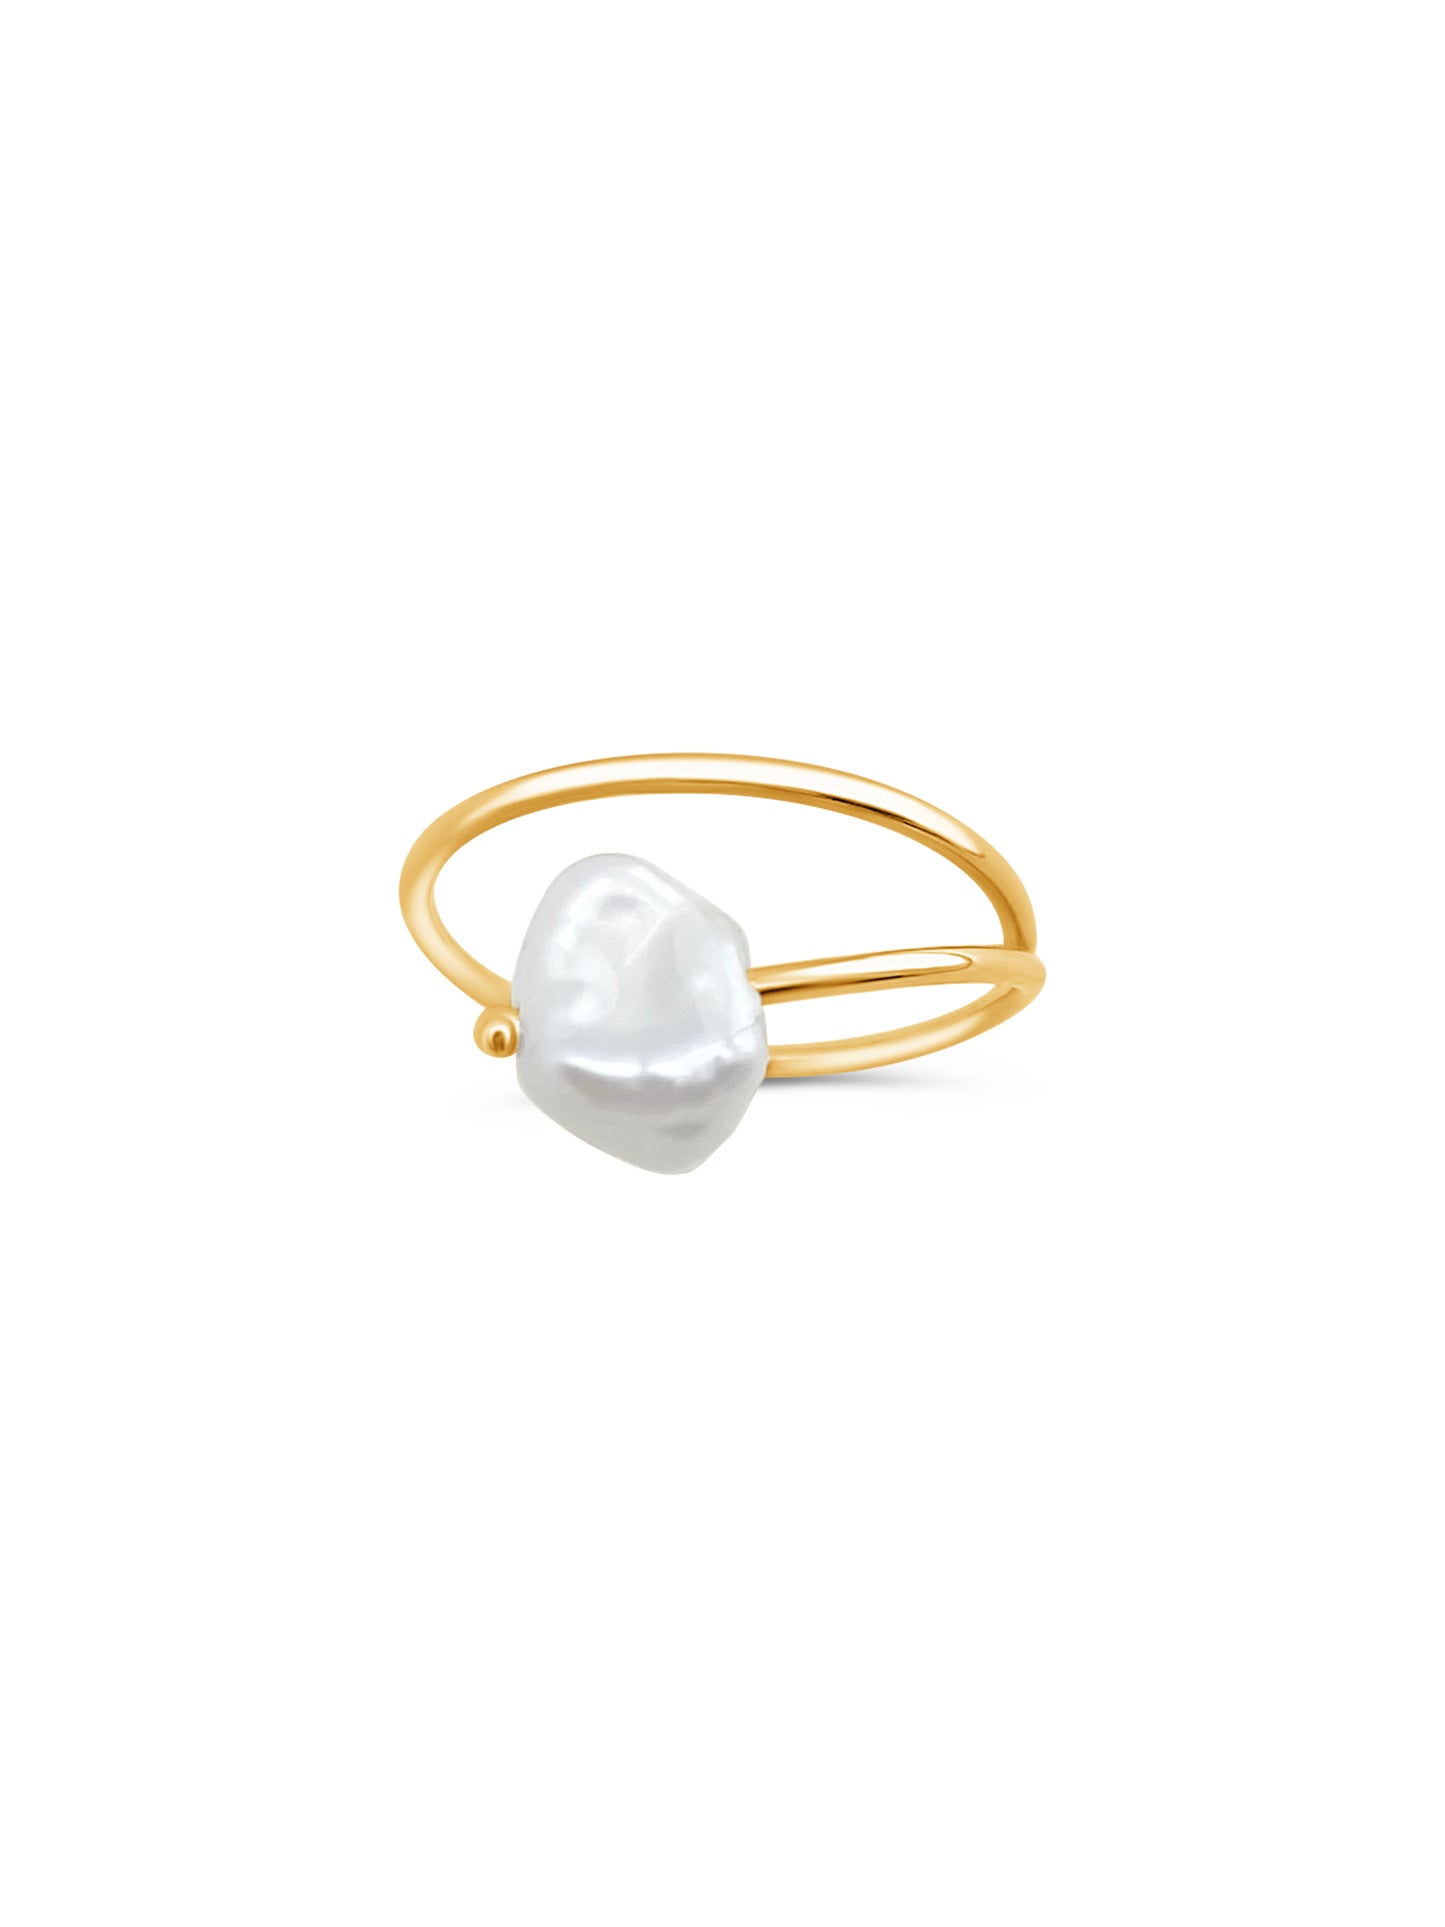 Pearl Ring On Gold Wire